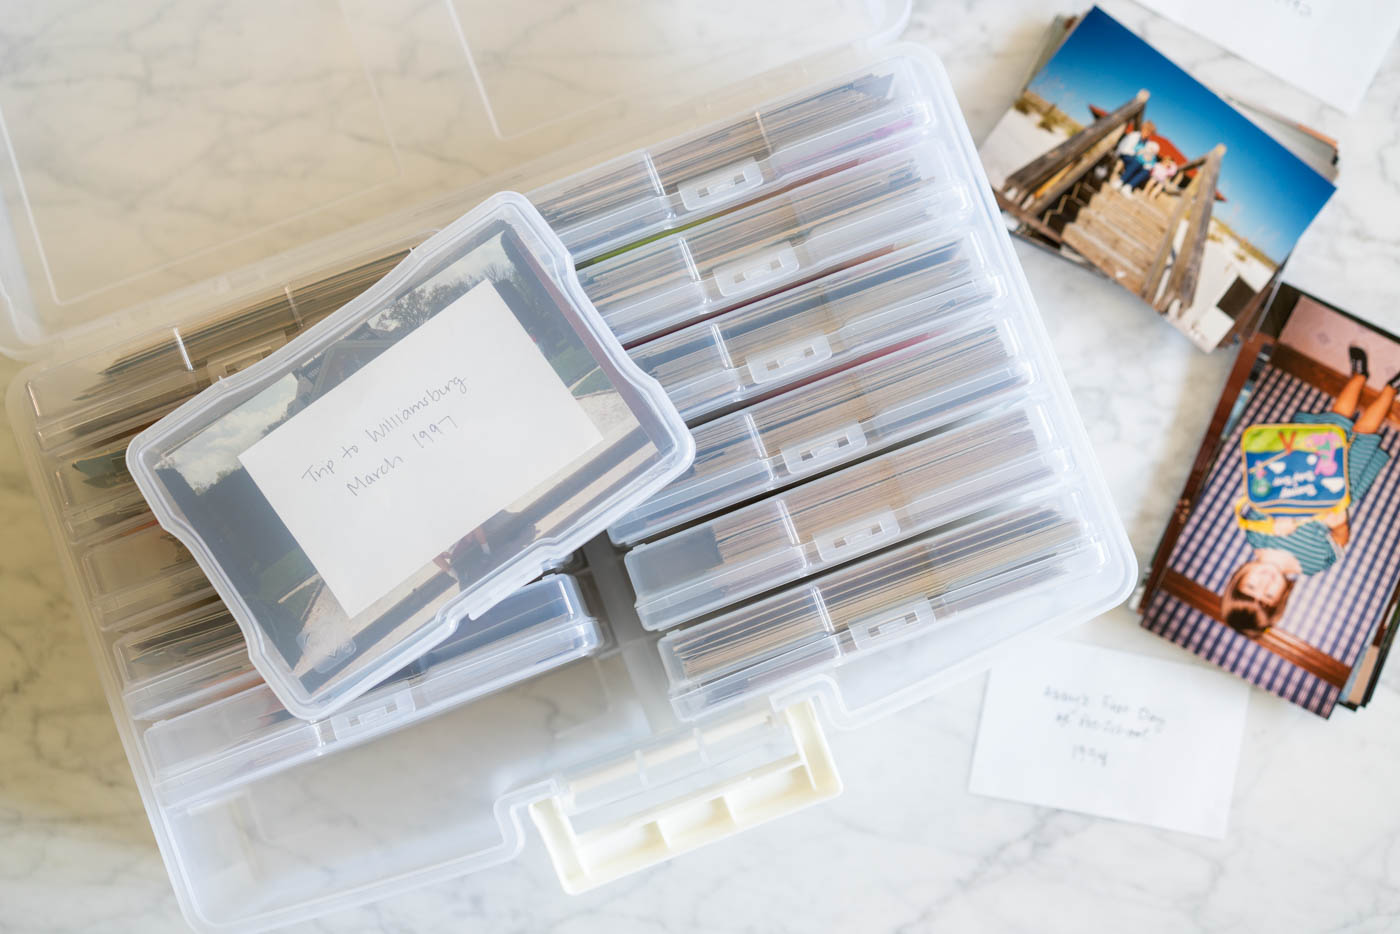 A clear plastic photo storage case surrounded by piles of 4x6" photos